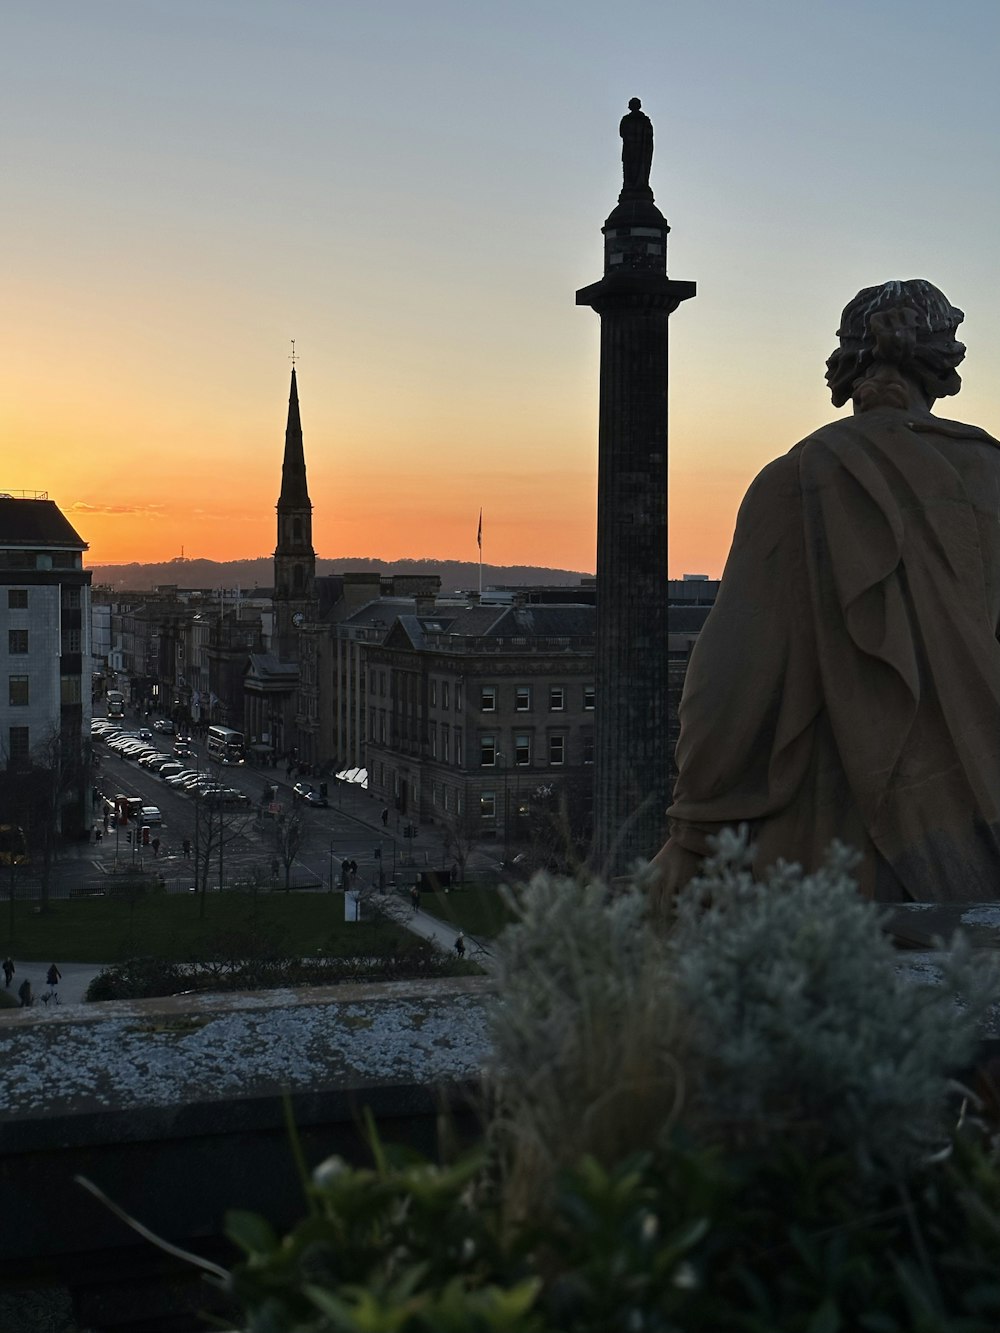 a statue of a person overlooking a city at sunset